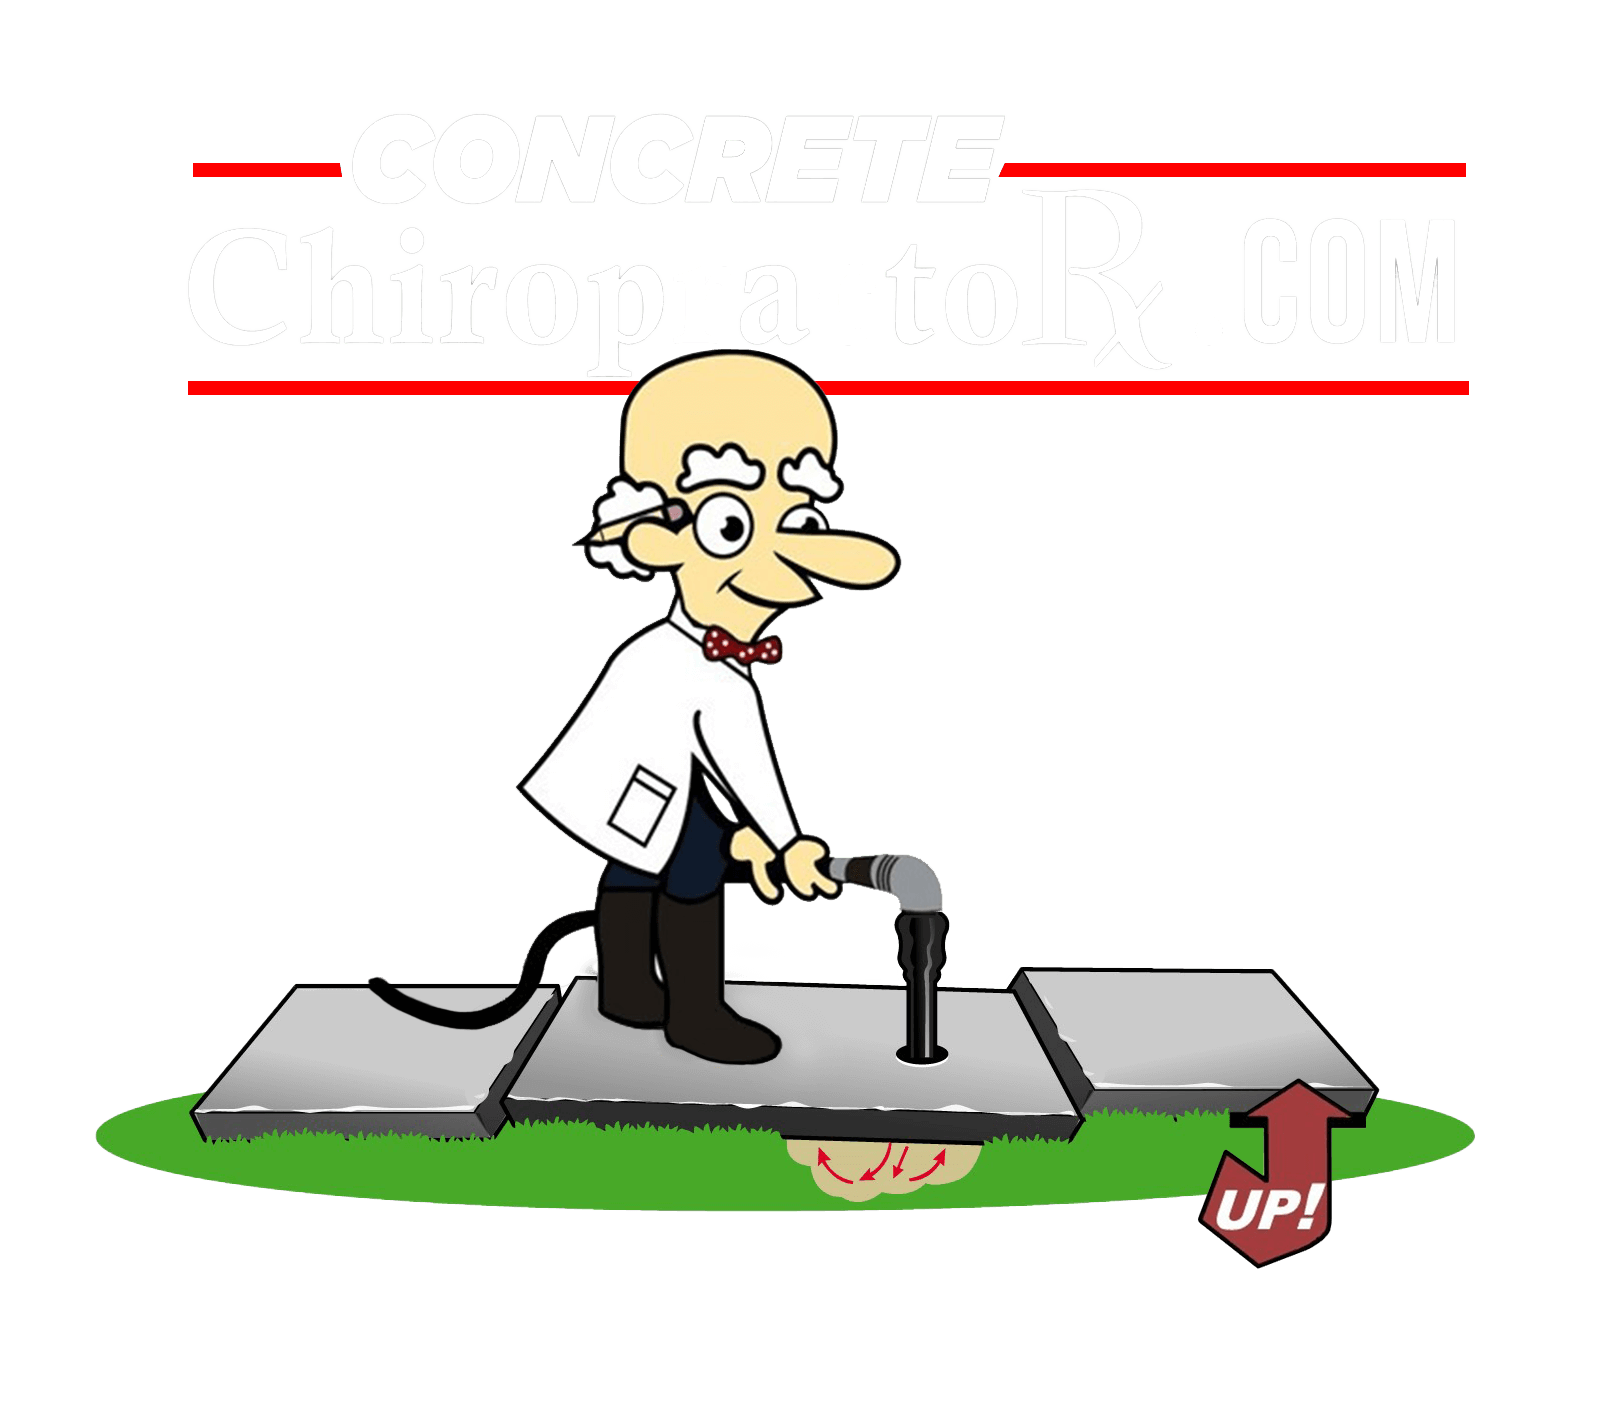 What Causes Concrete to Sink, Concrete Chiropractor